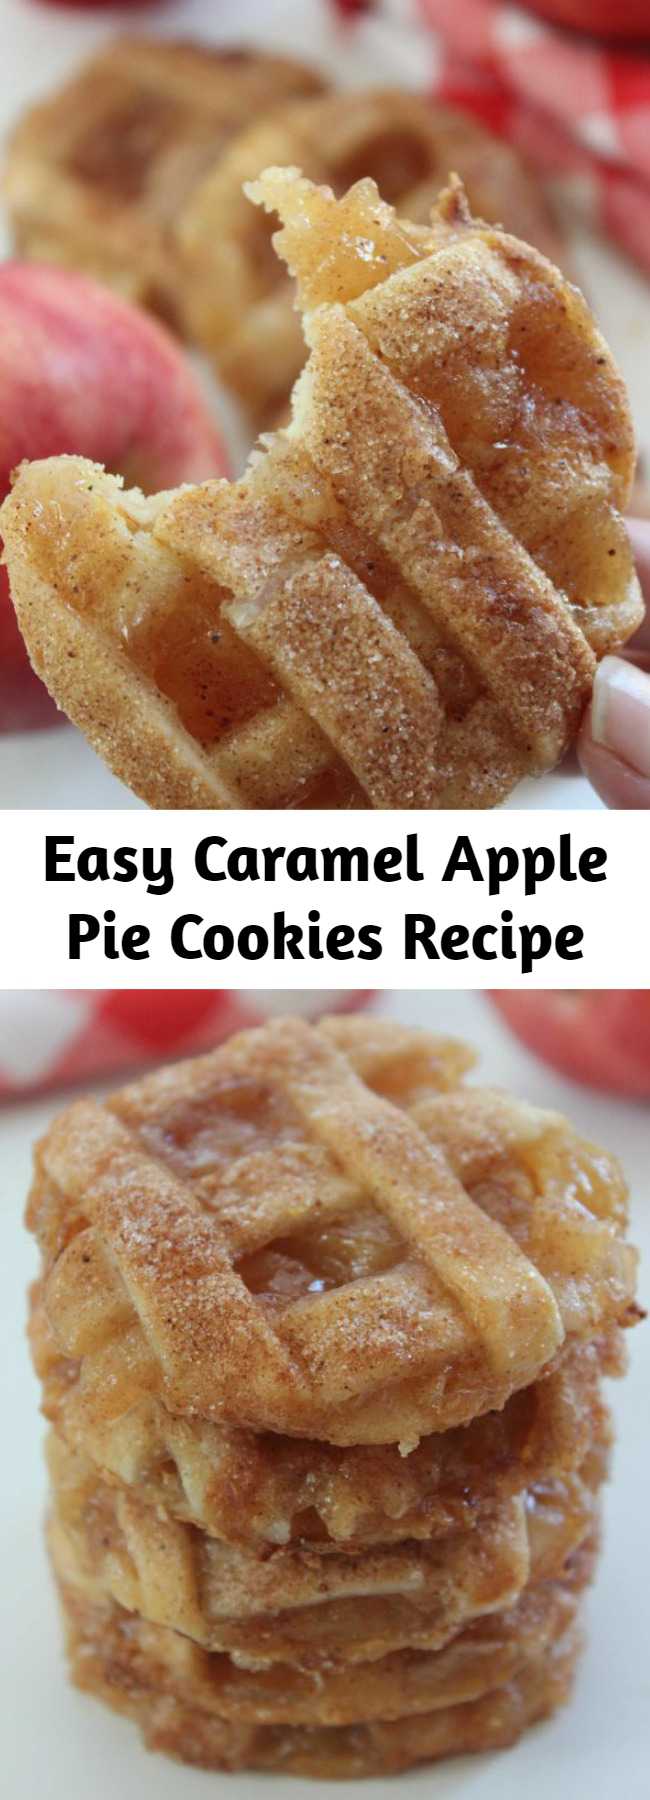 Easy Caramel Apple Pie Cookies Recipe - Fall will be here before we know it and these Caramel Apple Pie Cookies will make for a comforting dessert. They resemble a mini apple pie and are super delish. Fun and easy too since they use simple store bought ingredients. Whip them up in just a few minutes time.